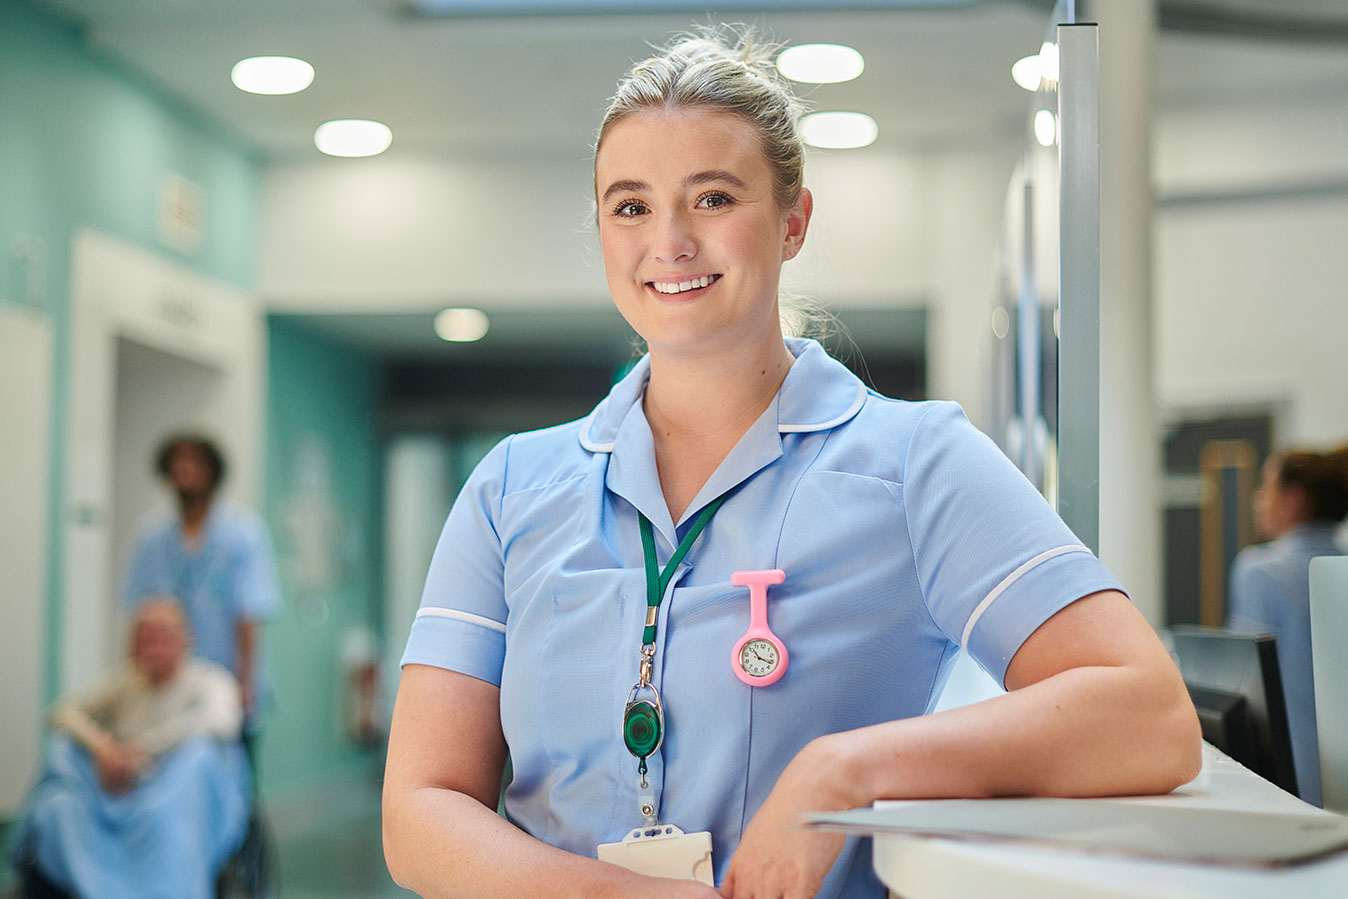 Nursing students can now access supported clinical placements in aged care